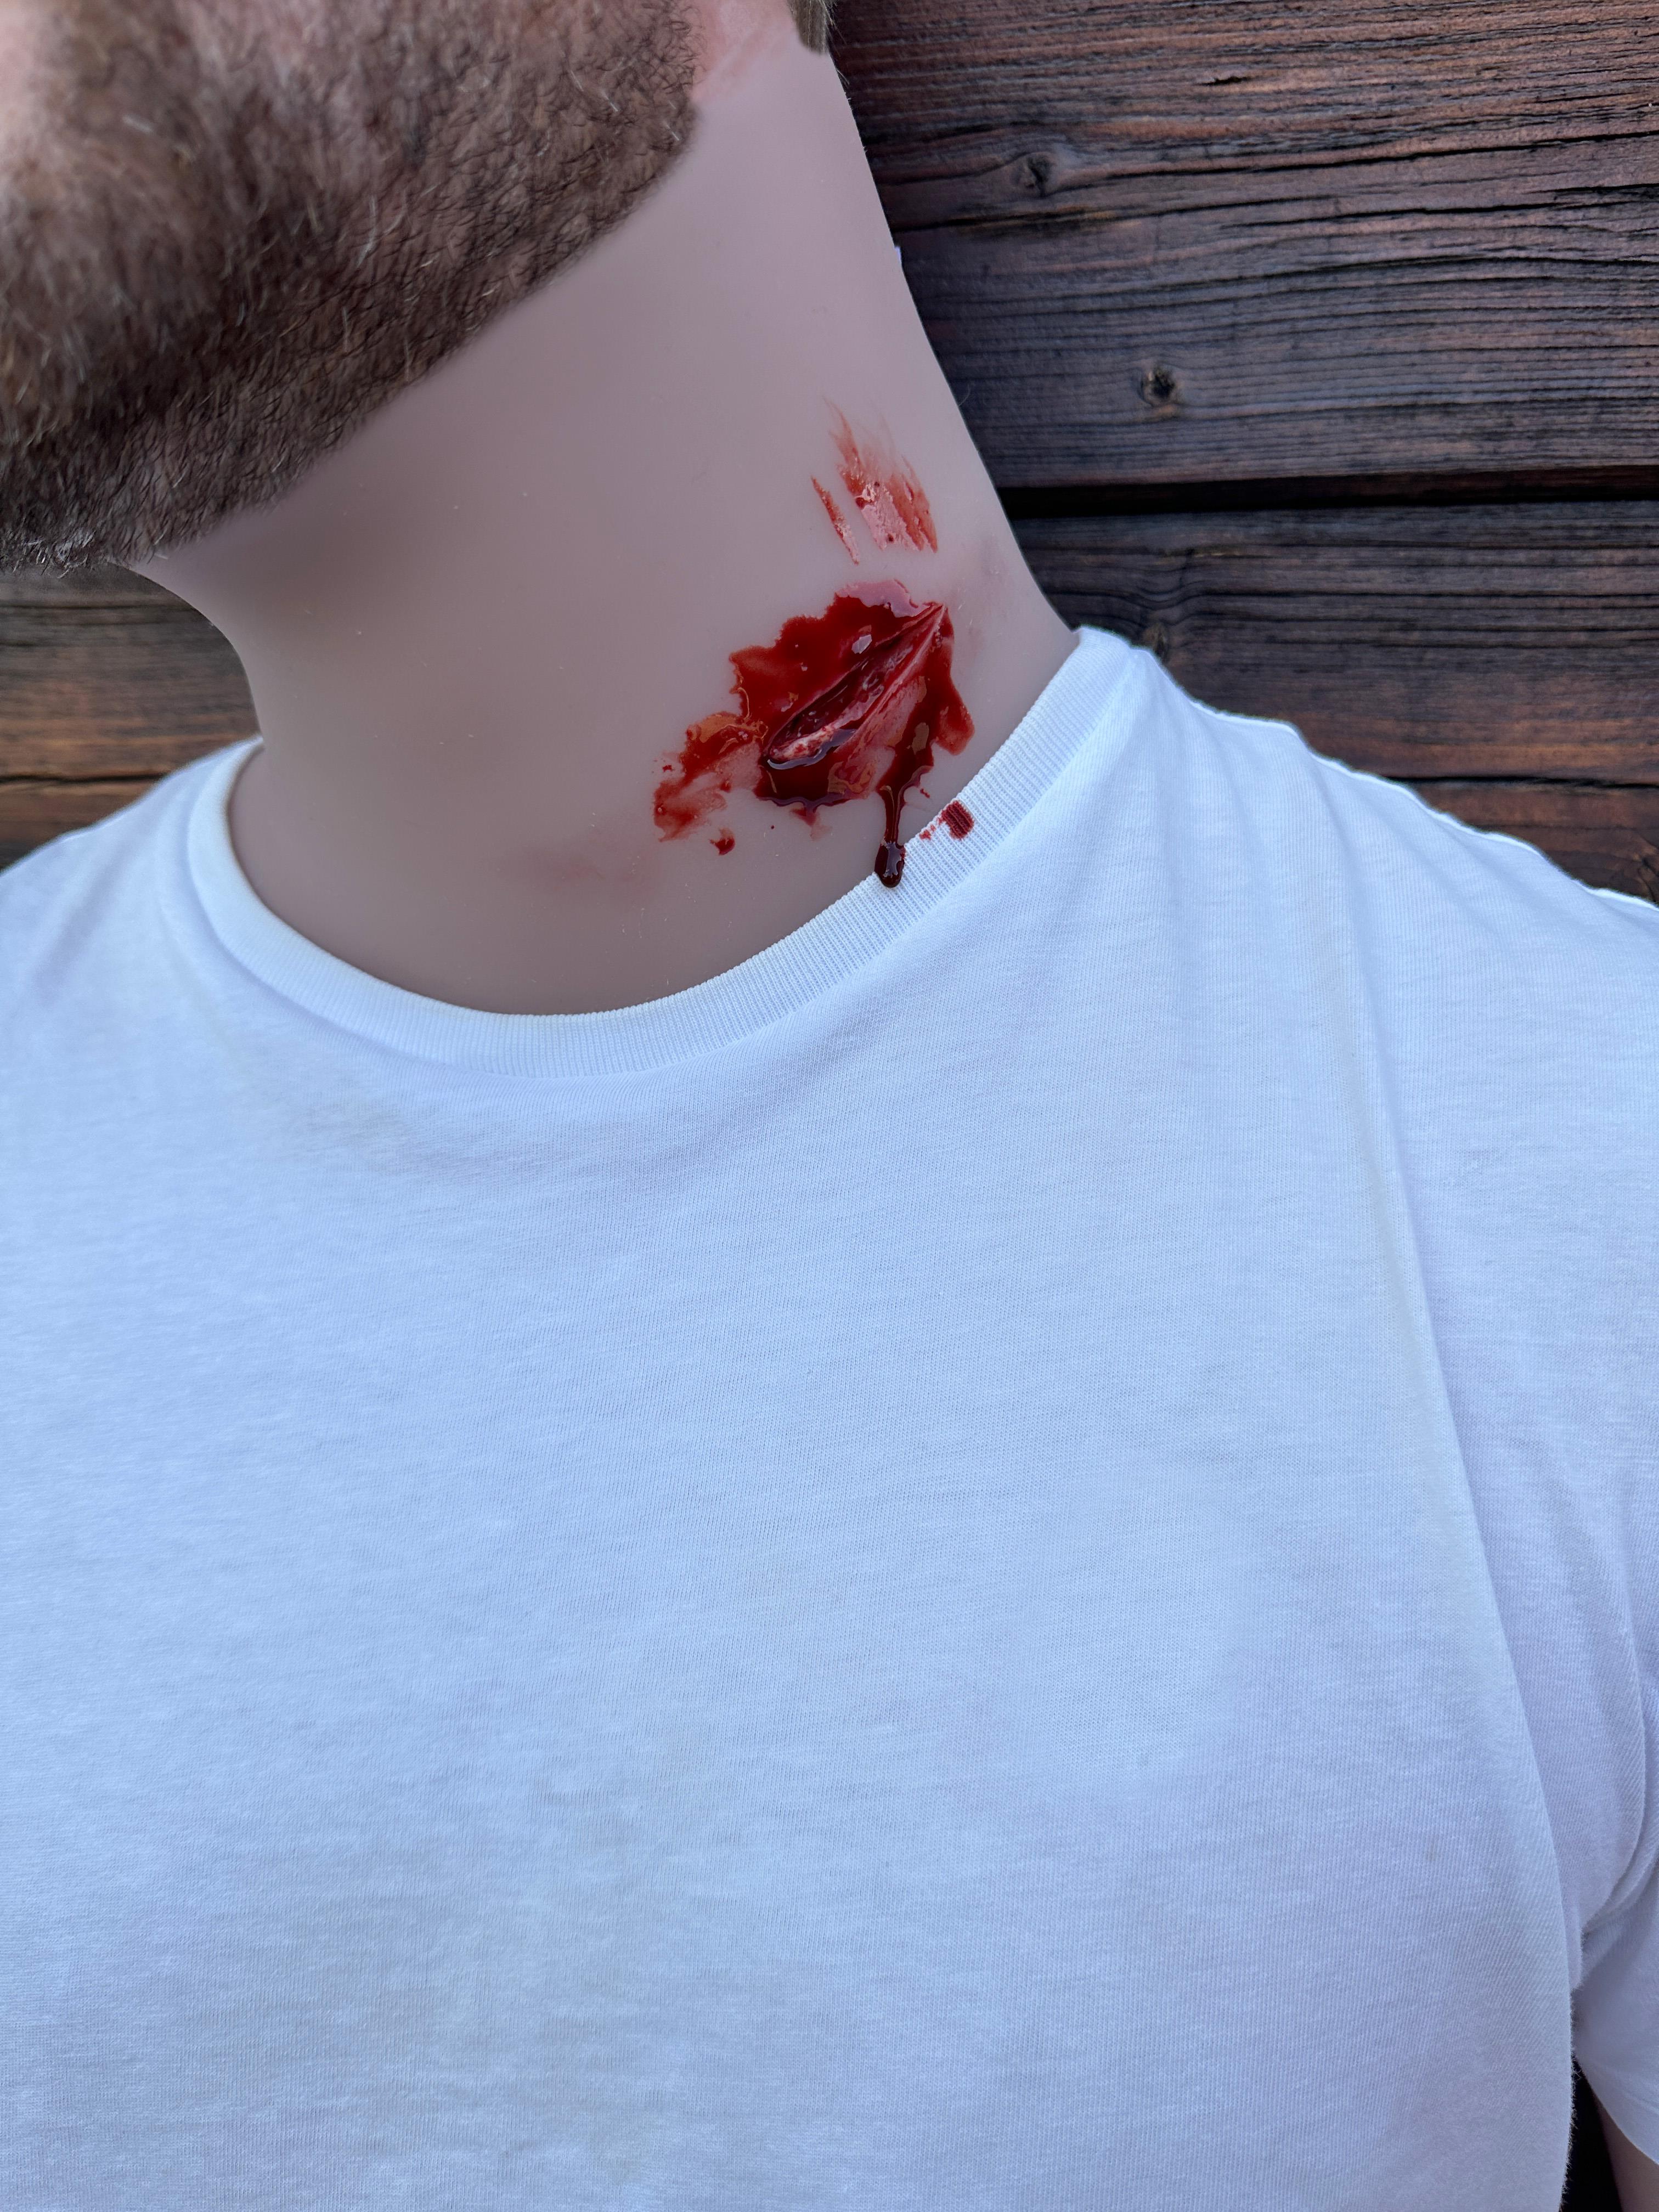 Wound-moulage-Stab-wound-neck-2